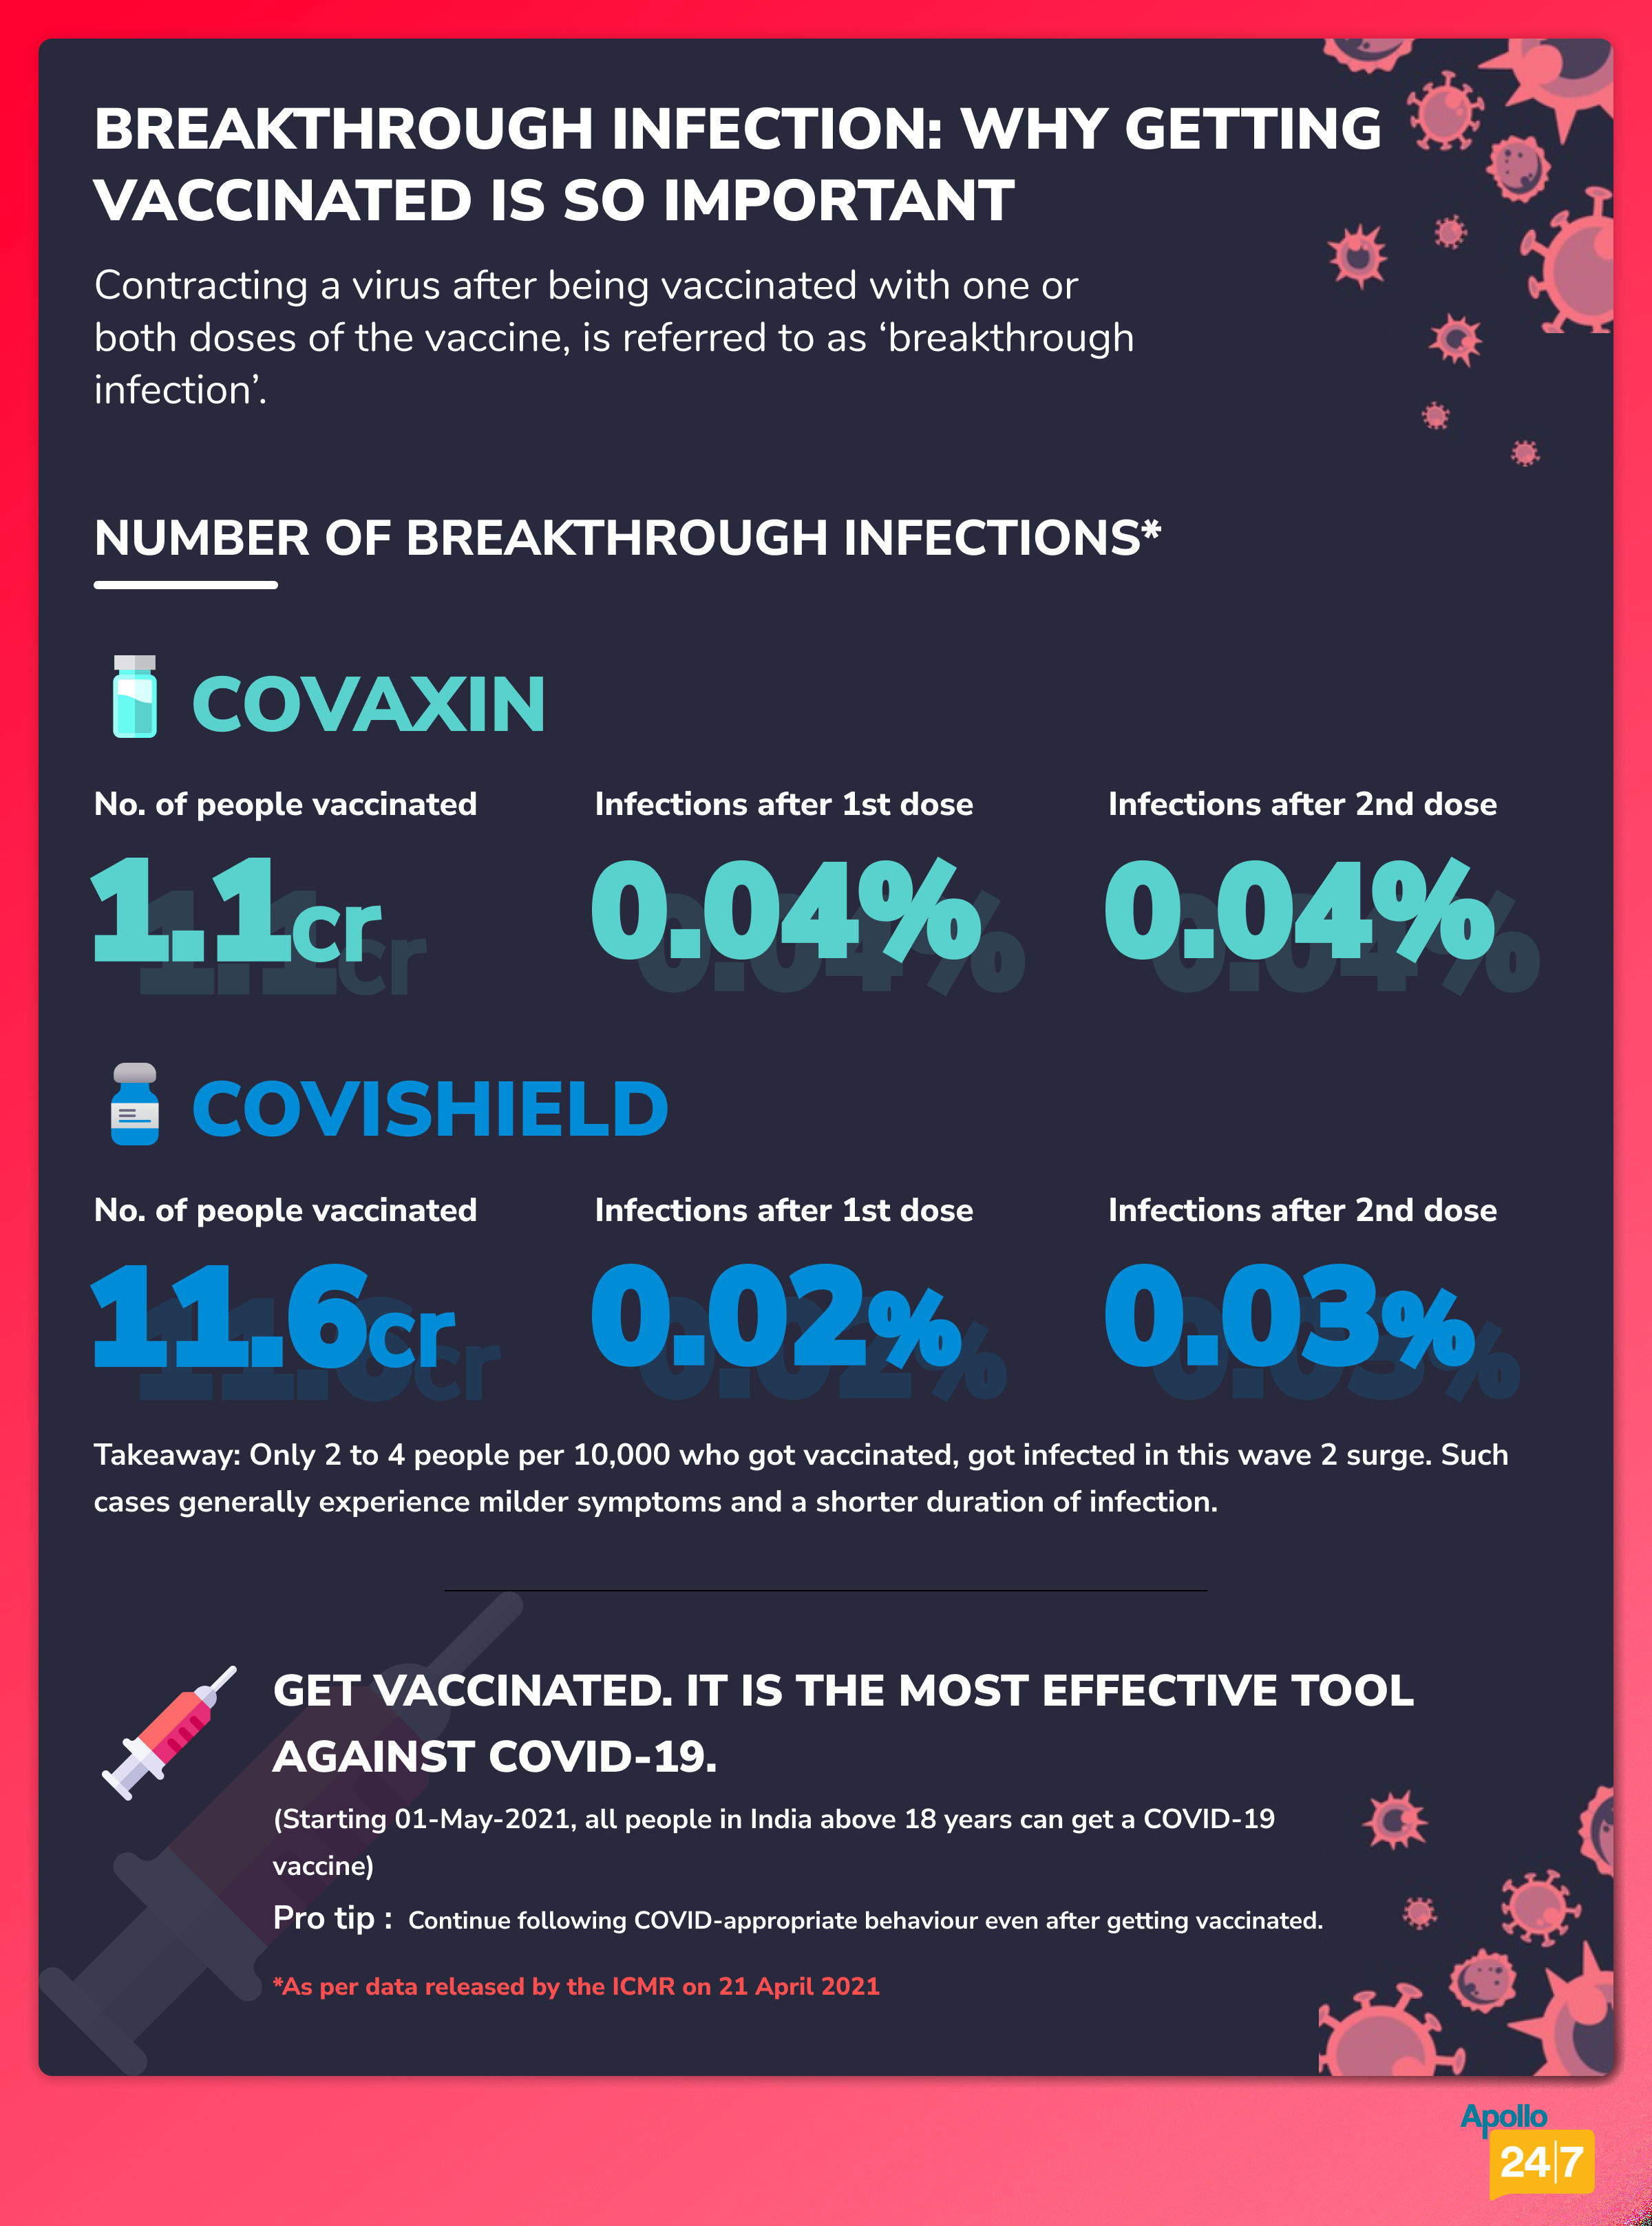 Contracting a virus after being vaccinated with one or both doses of the vaccine, is referred to as ‘breakthrough infection’.